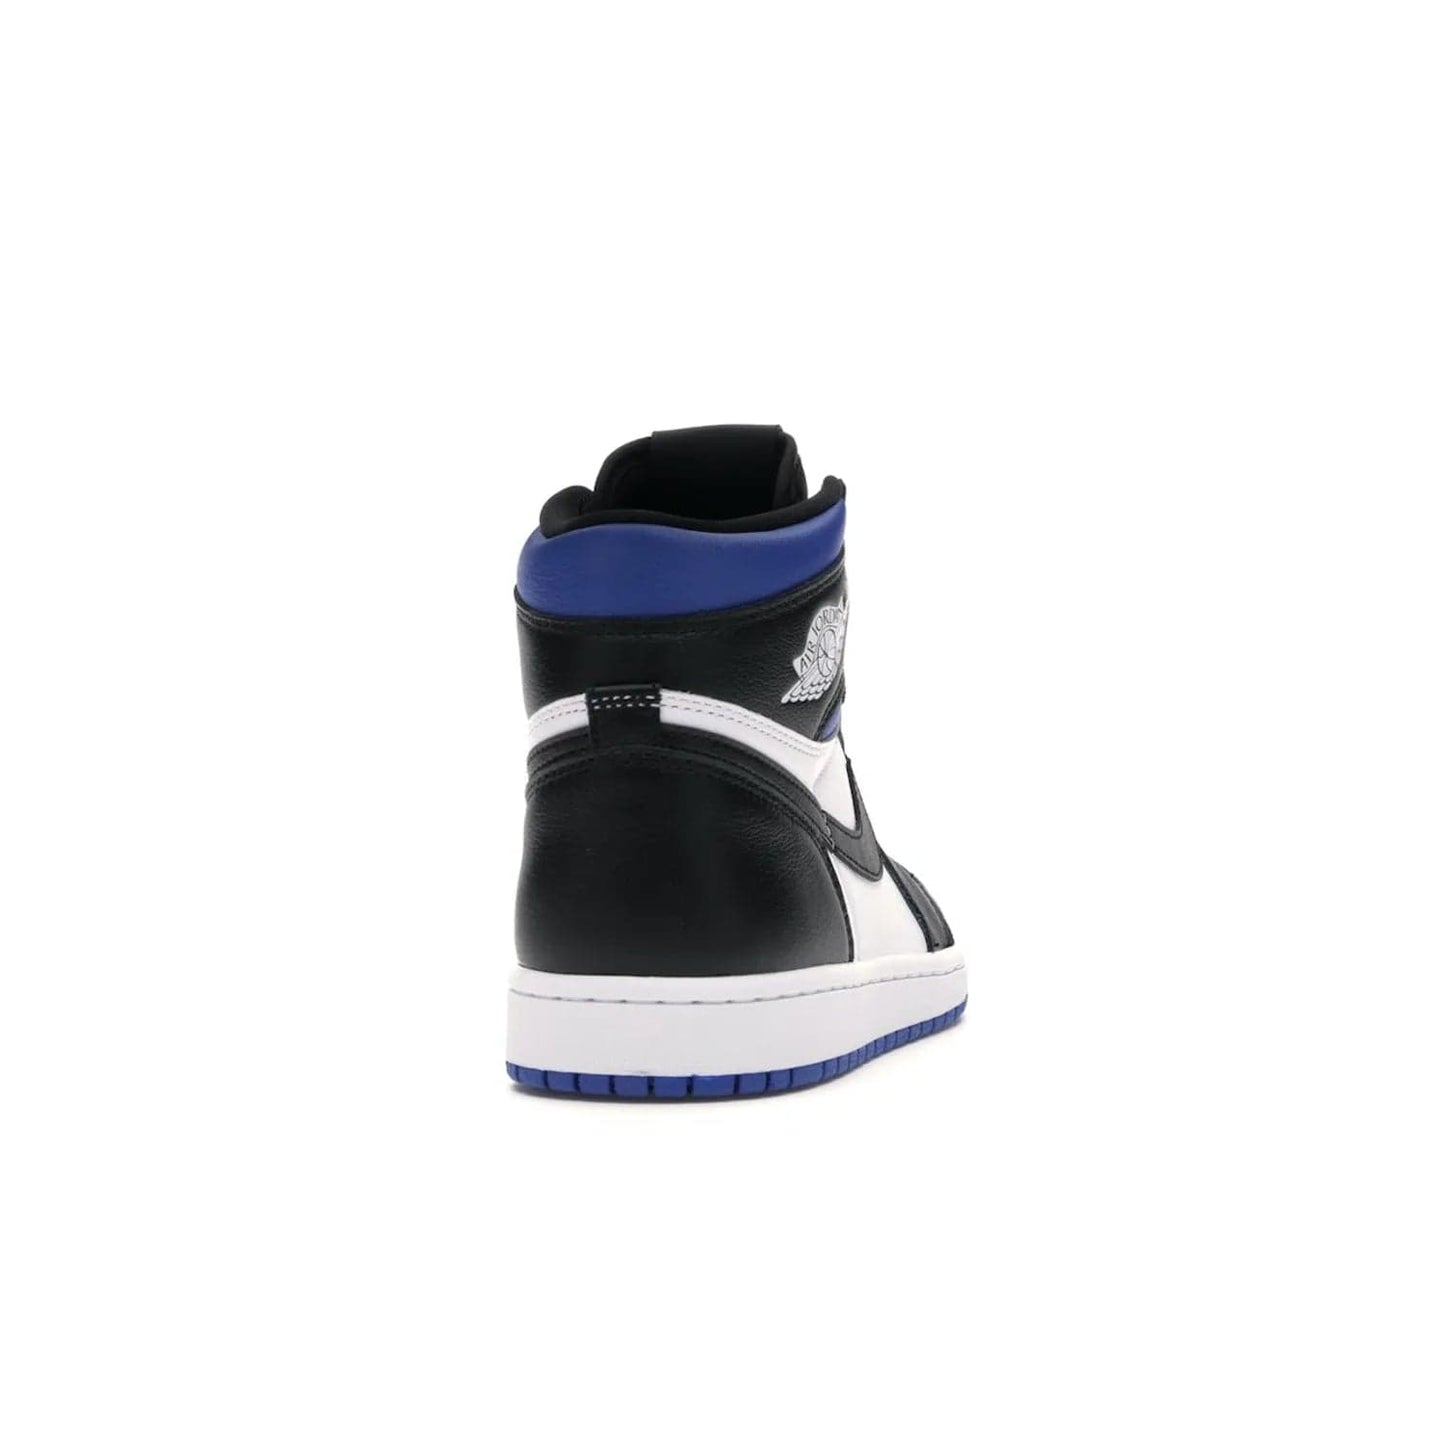 Jordan 1 Retro High Royal Toe - Image 29 - Only at www.BallersClubKickz.com - Refresh your look with the Jordan 1 Retro High Royal Toe. This classic AJ 1 sports a white and royal leather upper, black leather overlays, and branded leather tongue tag. Pick up today and set the streets ablaze.